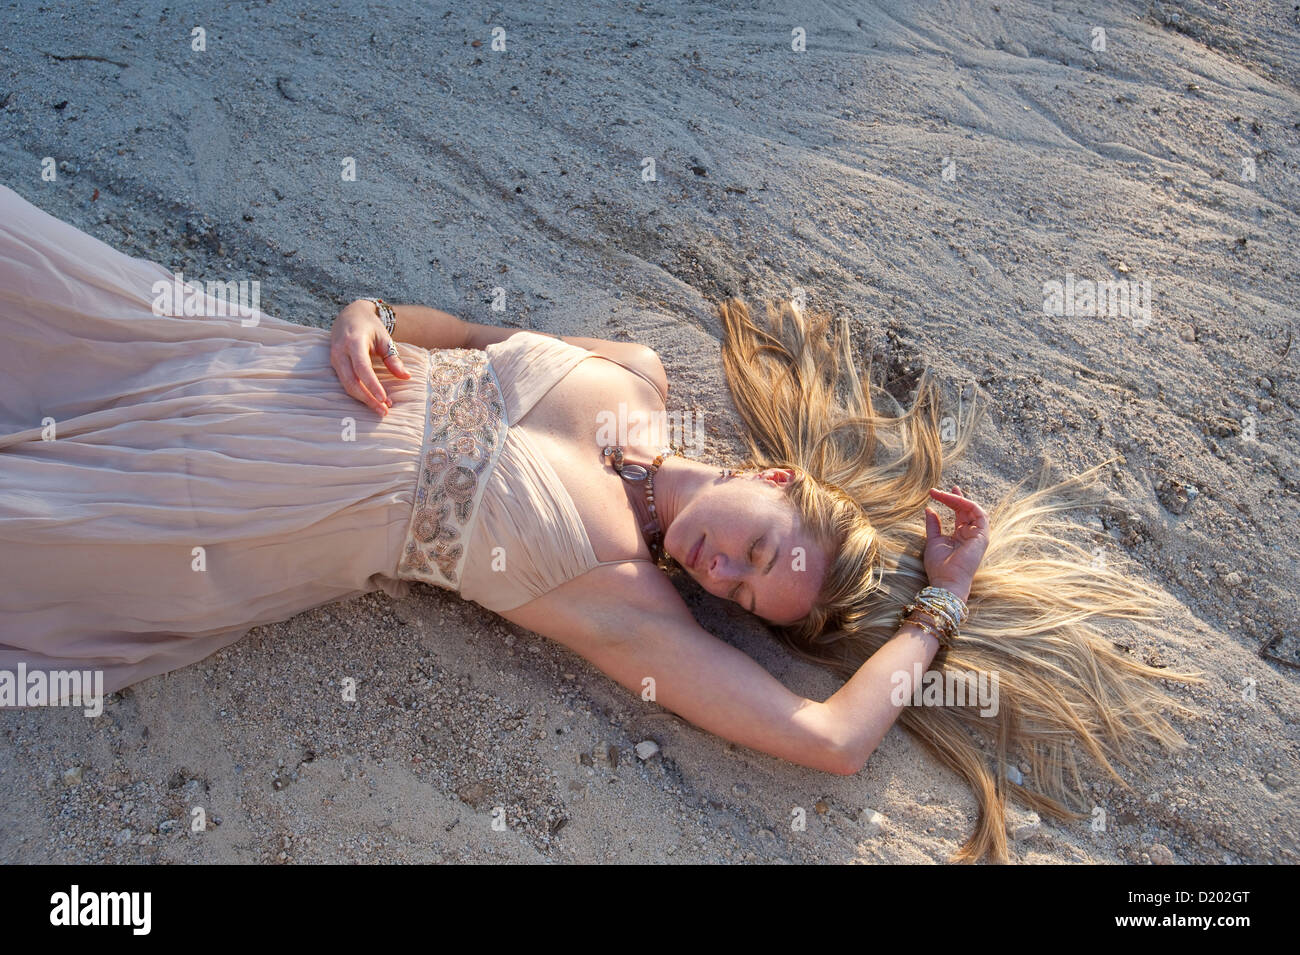 Woman lying in dry river run dans une belle robe. Banque D'Images